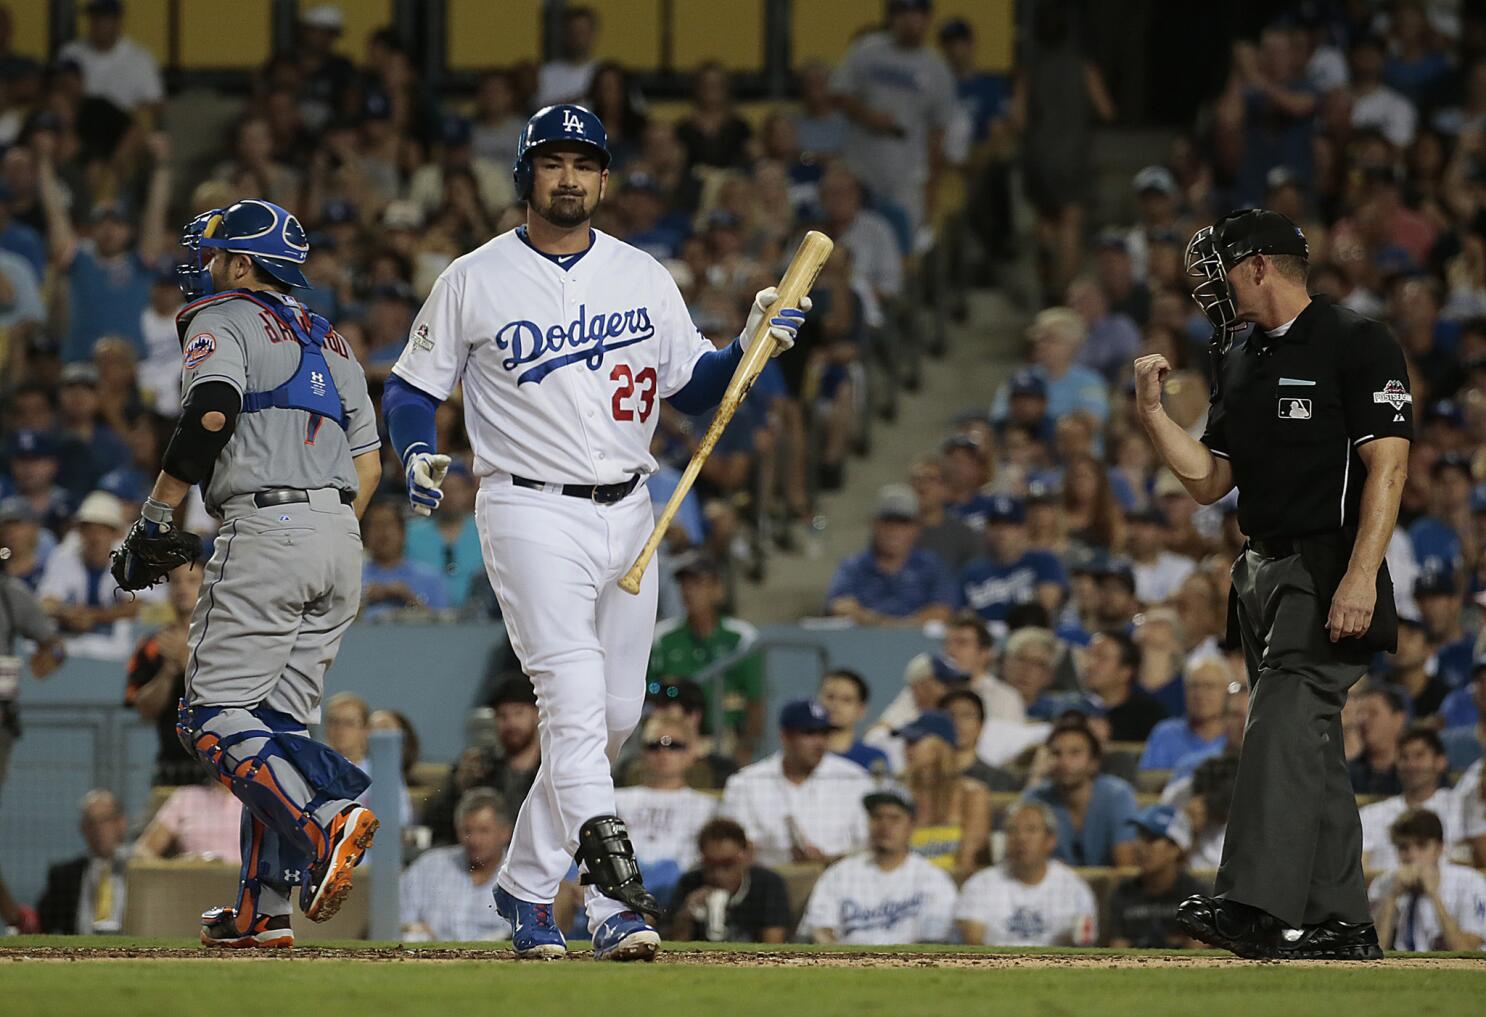 Can the Dodgers really win with just half of Adrian Gonzalez